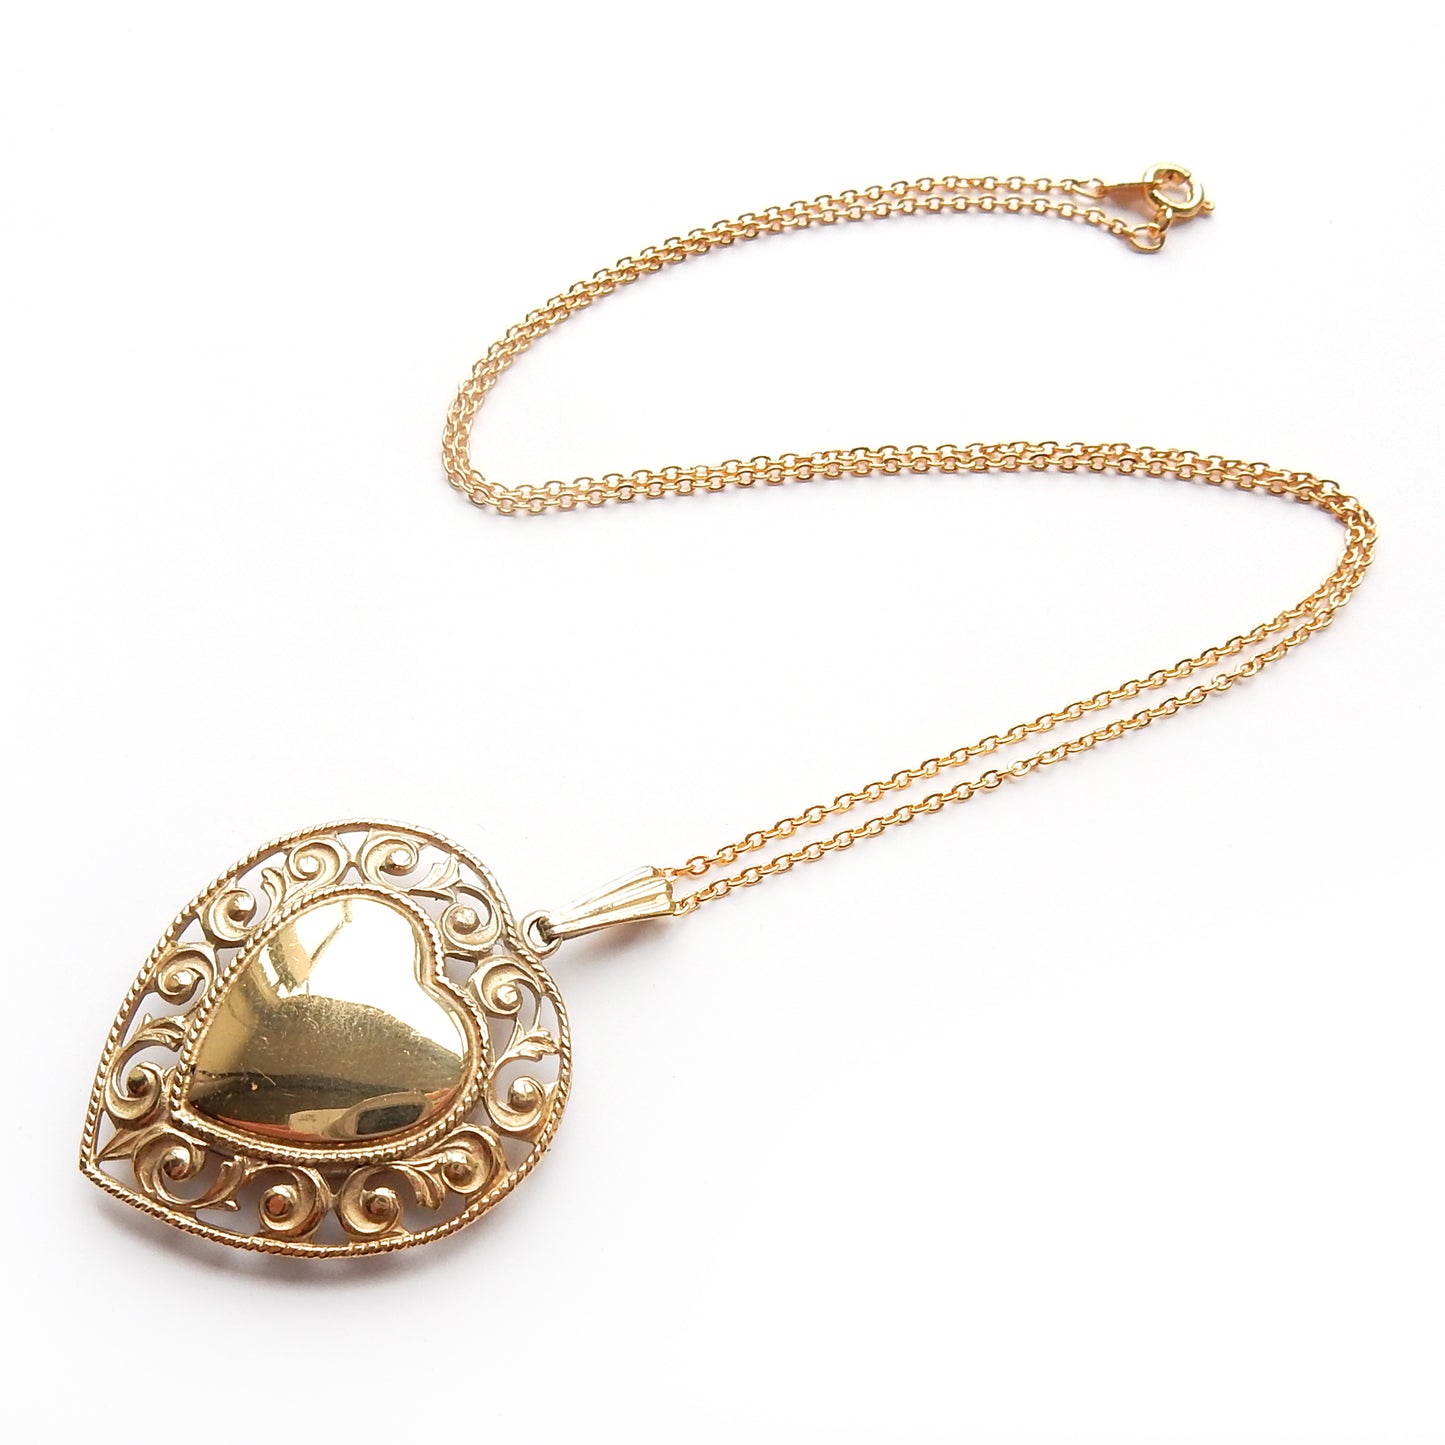 Vintage Rolled Gold Heart Locket & Chain